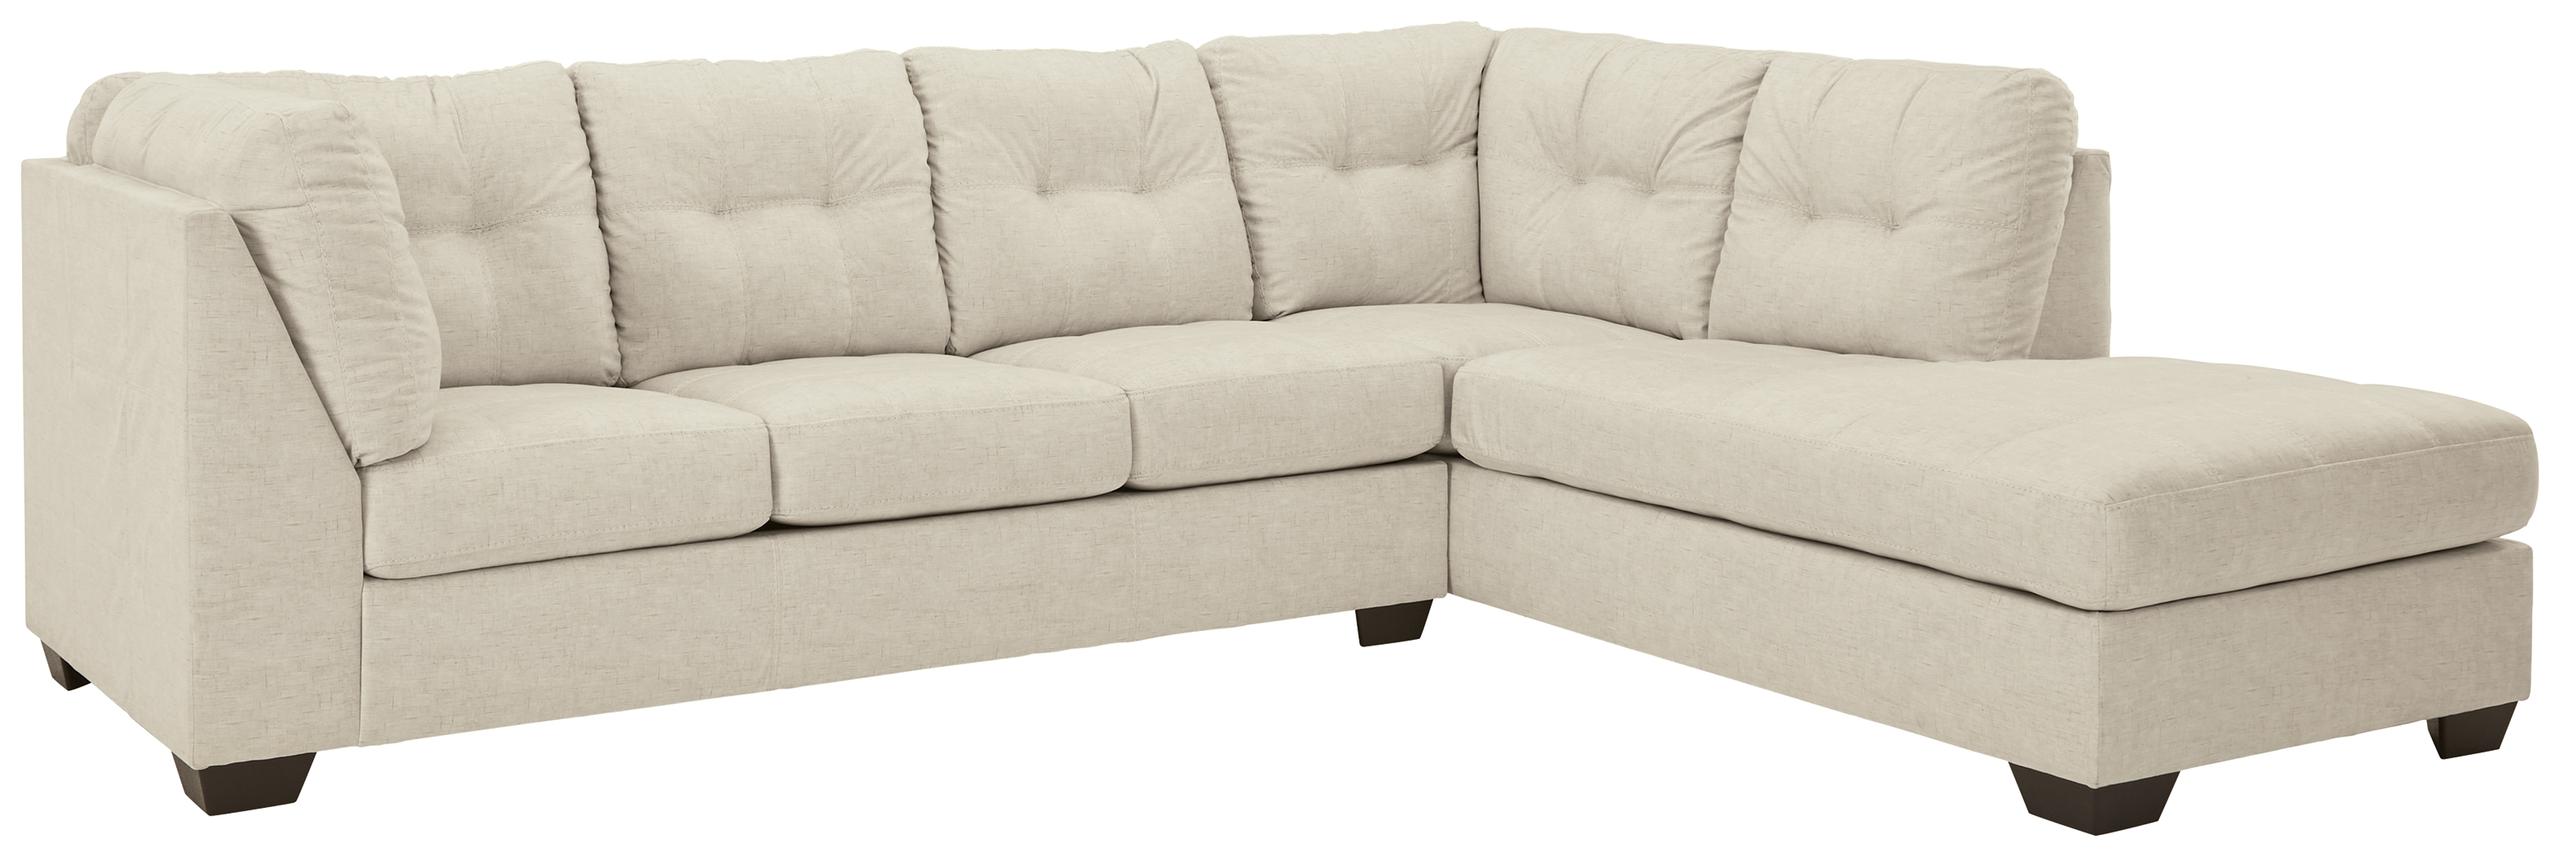 ASHLEY FURNITURE 80806S2 Falkirk 2-piece Sectional With Chaise